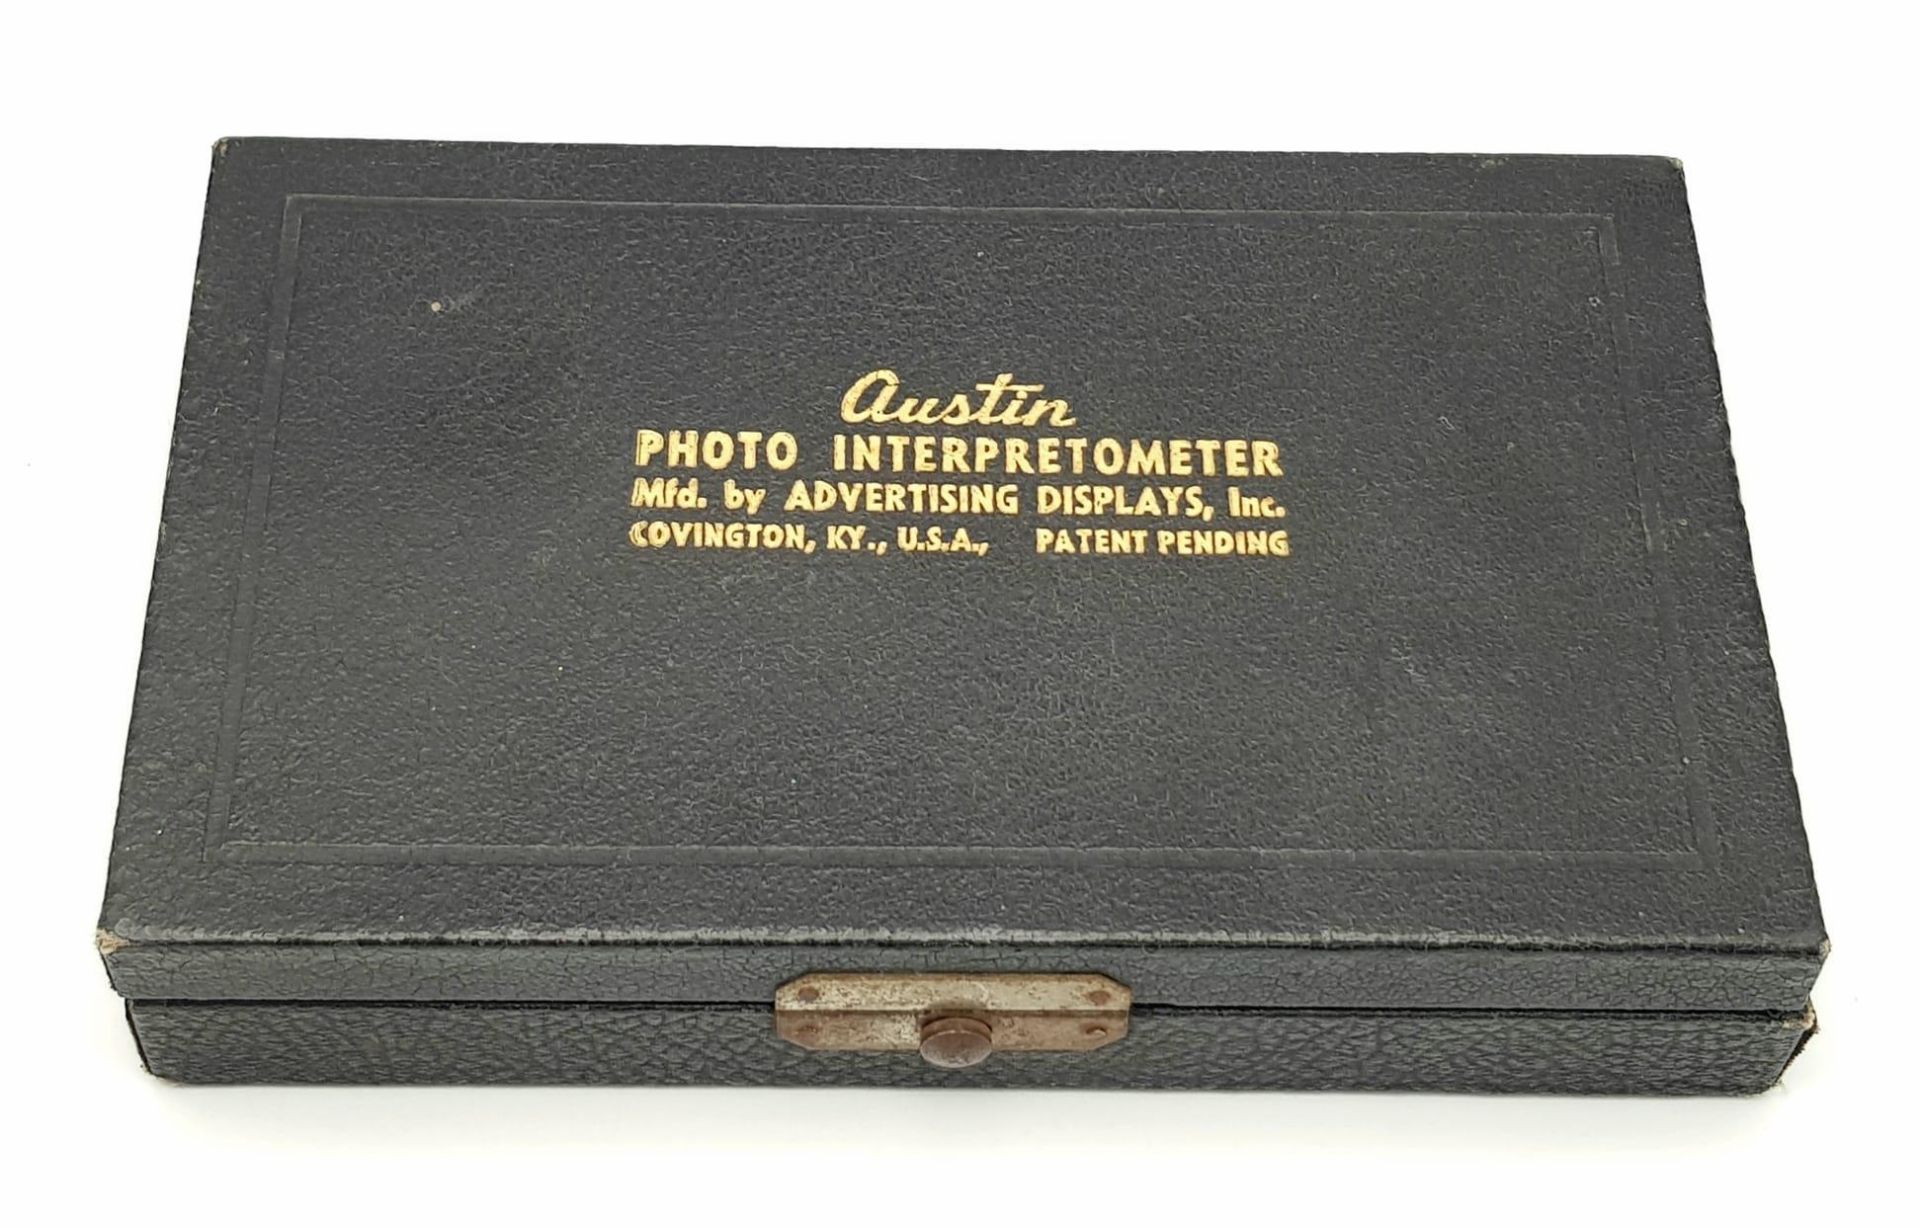 A Vintage Austin Photo Interpretometer - Used for measuring distances in stereoscopic photographs. - Image 6 of 7